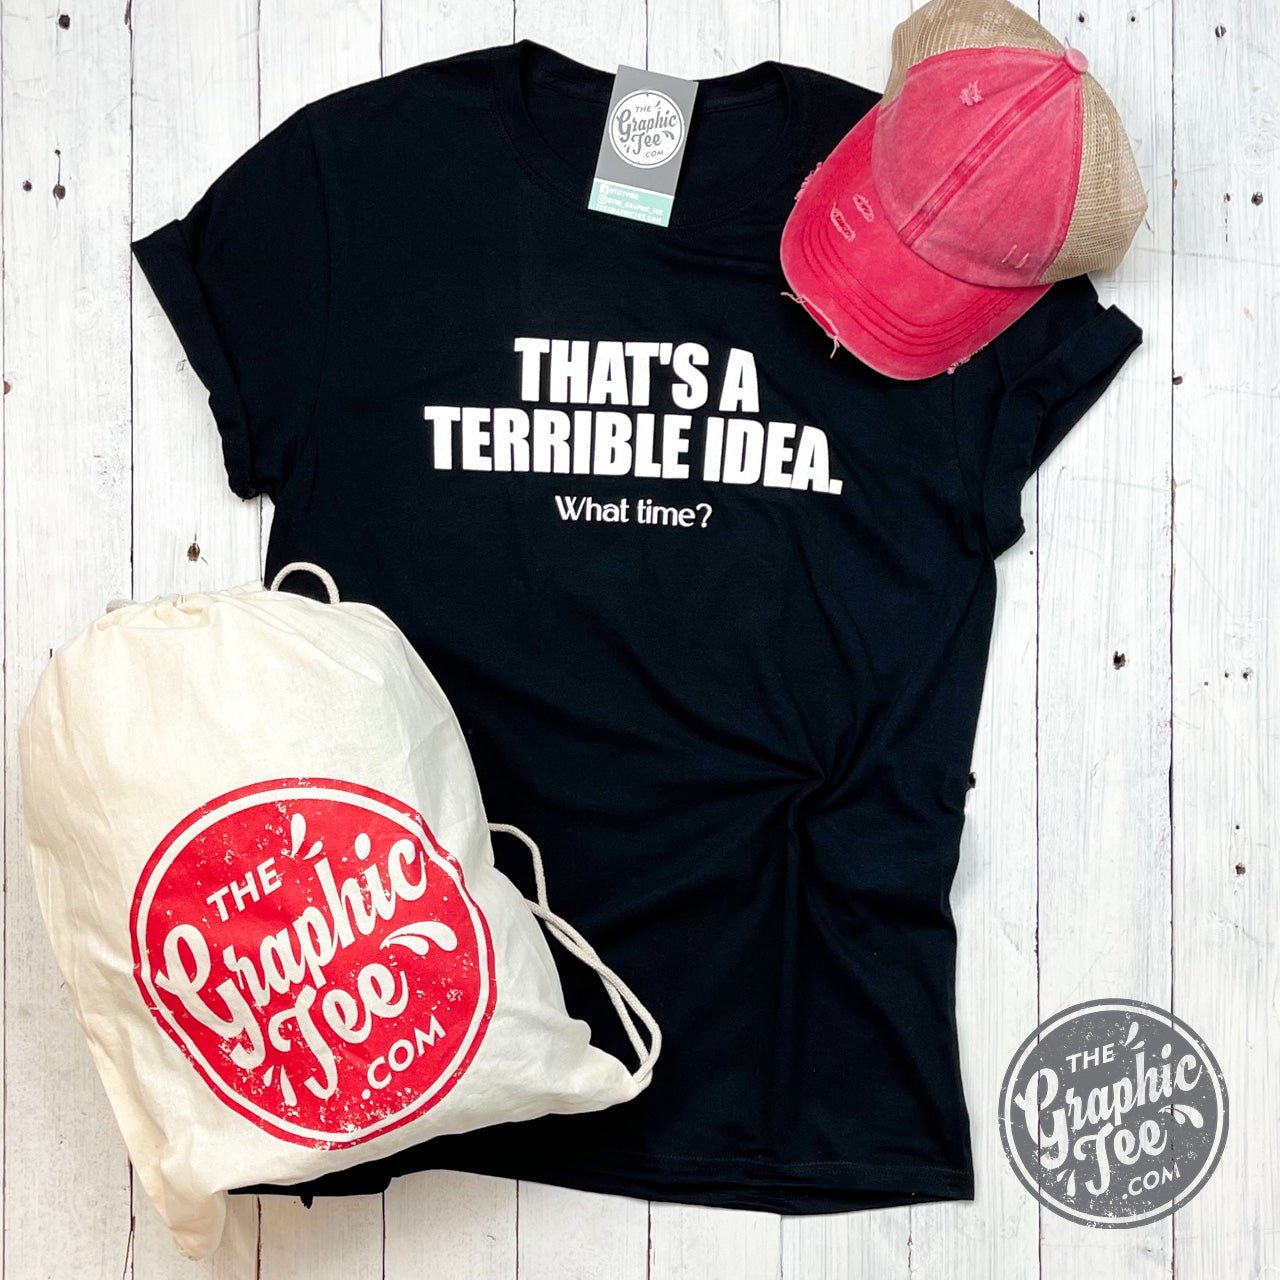 That's A Terrible Idea What Time? - Adult Tee - The Graphic Tee